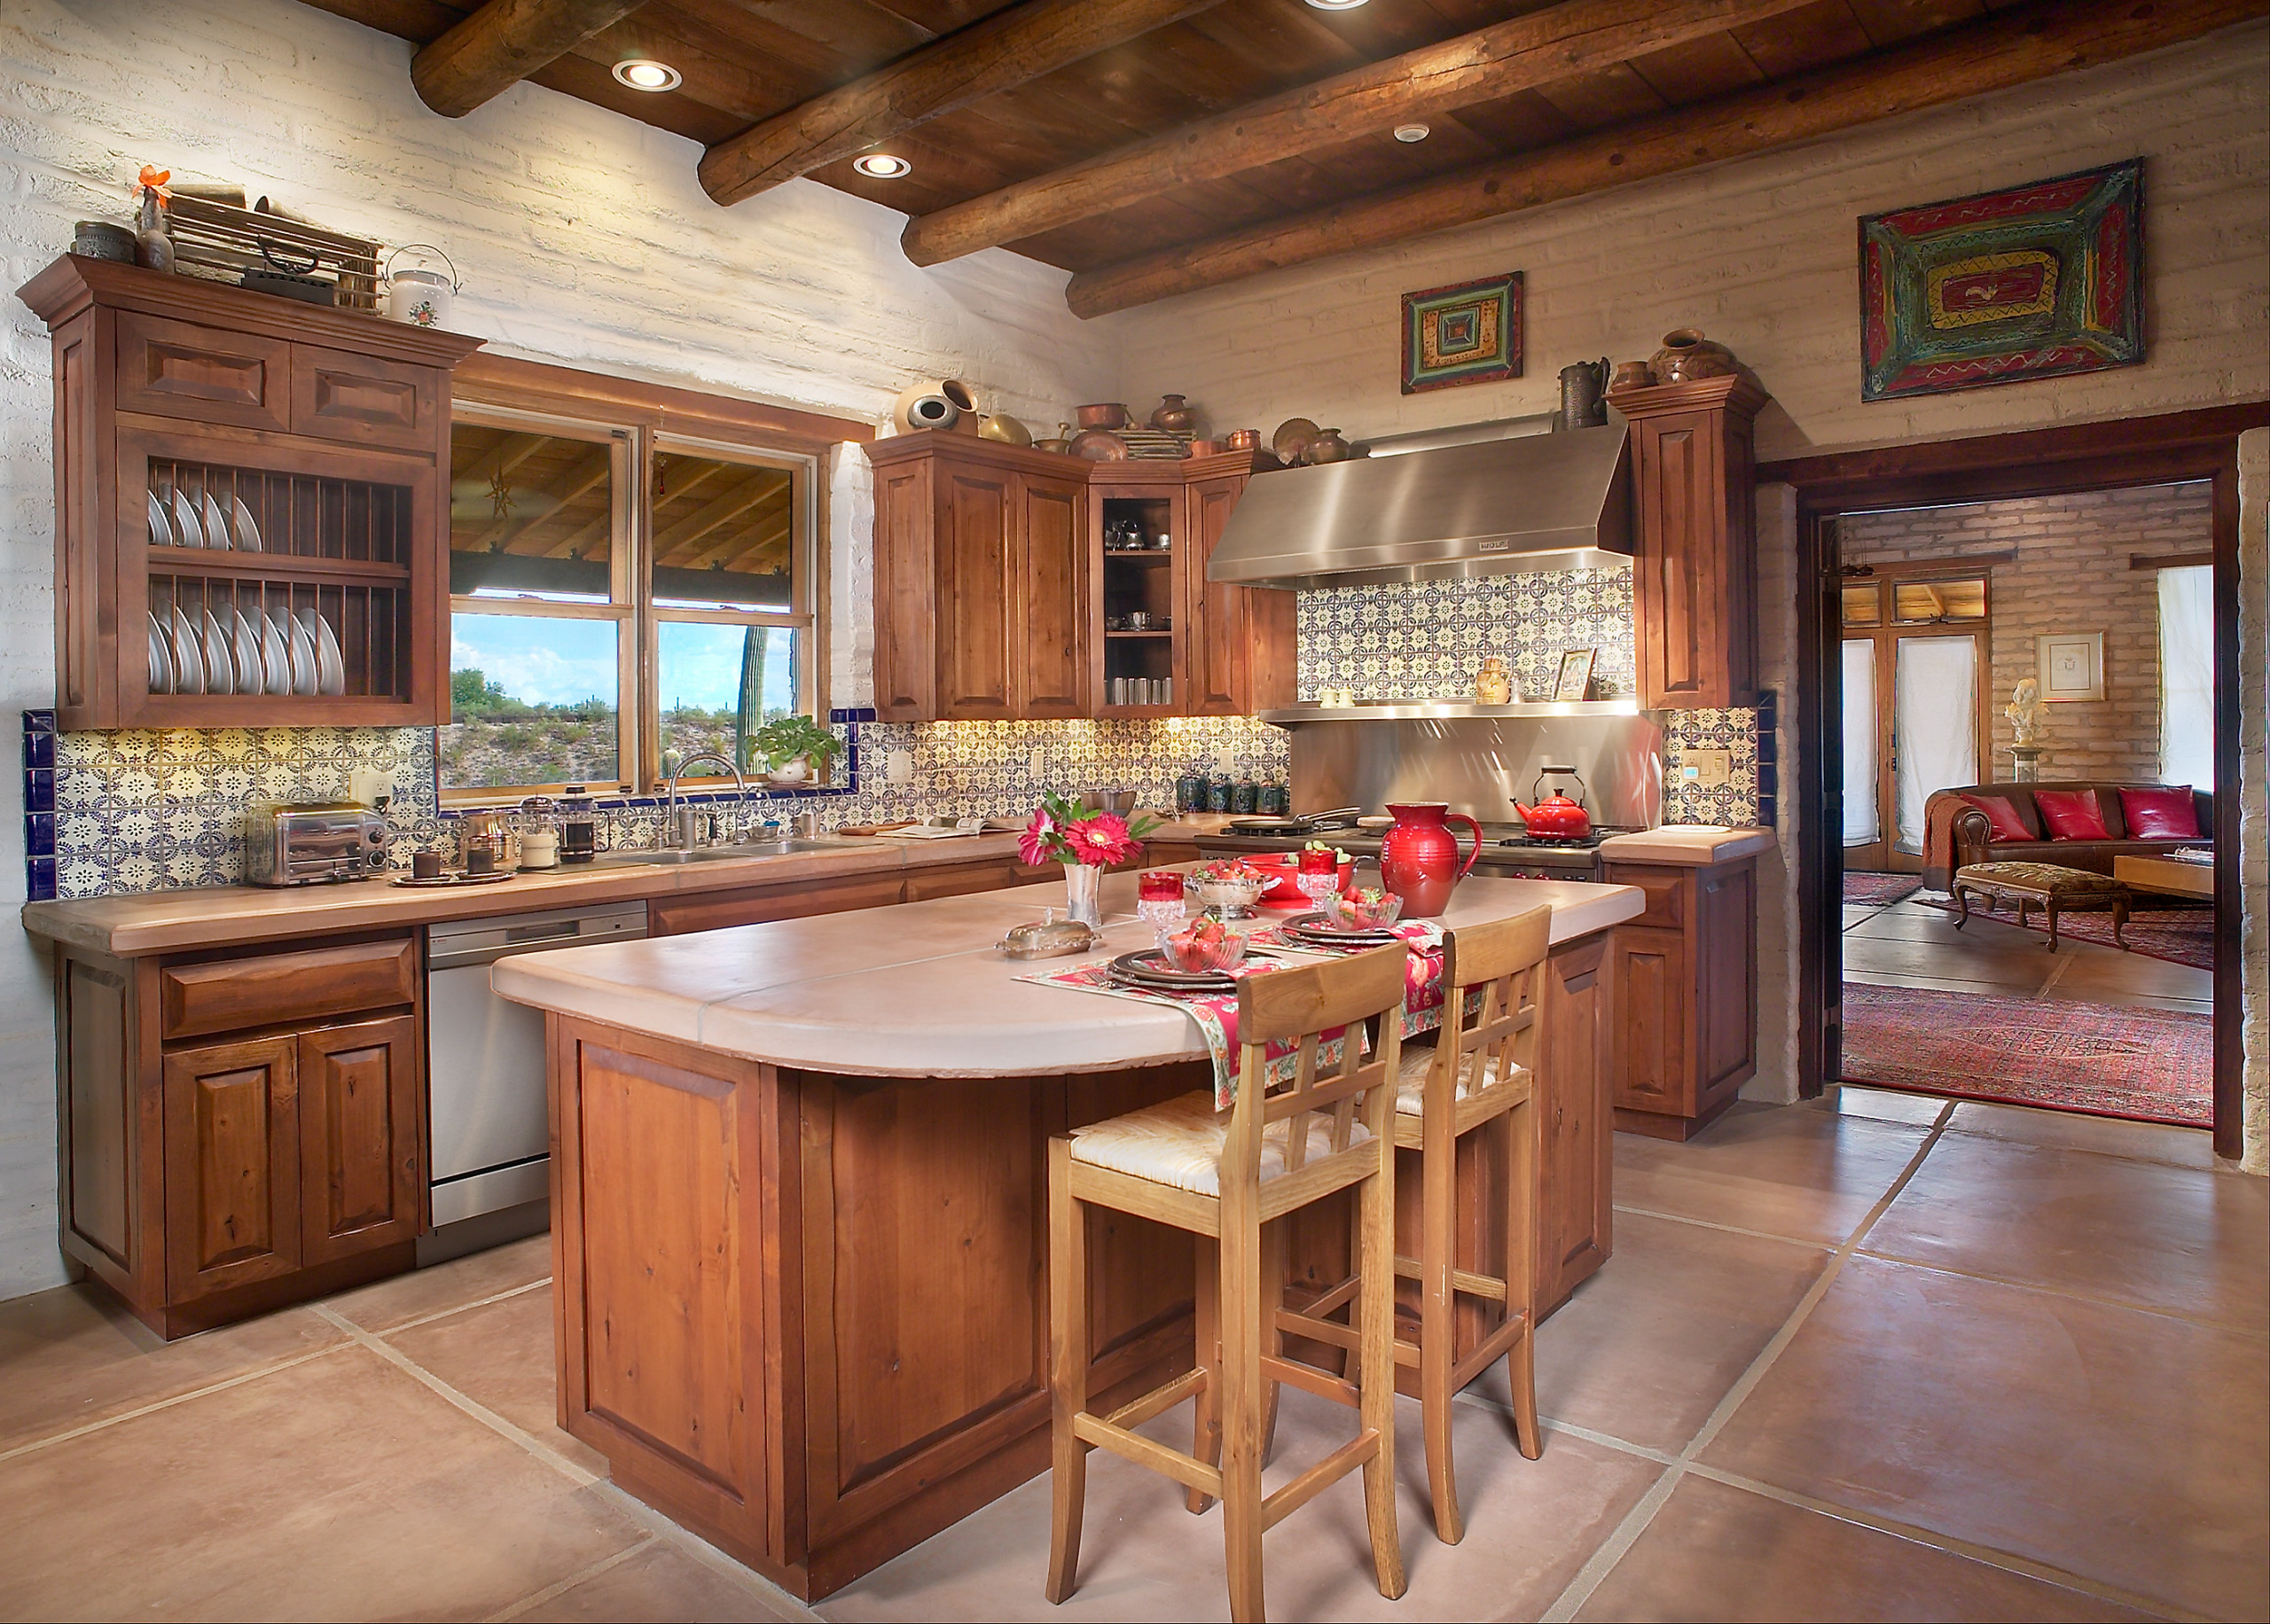 Oro Valley Kitchen with a Turquoise Island - Southwest Kitchen